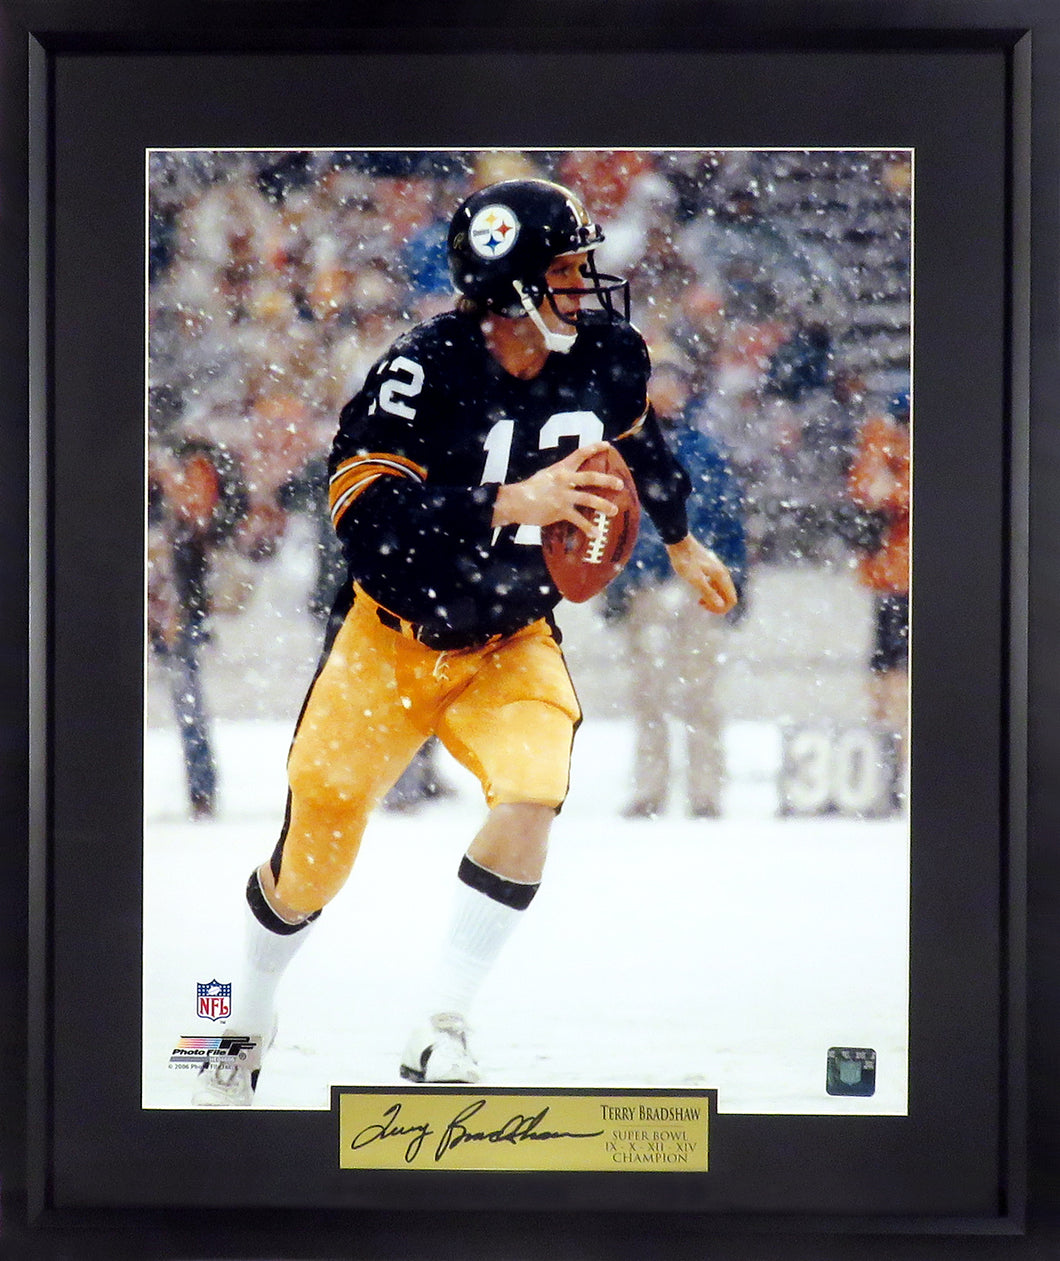 Terry Bradshaw “Snow Game” Framed Photograph (Engraved Series)